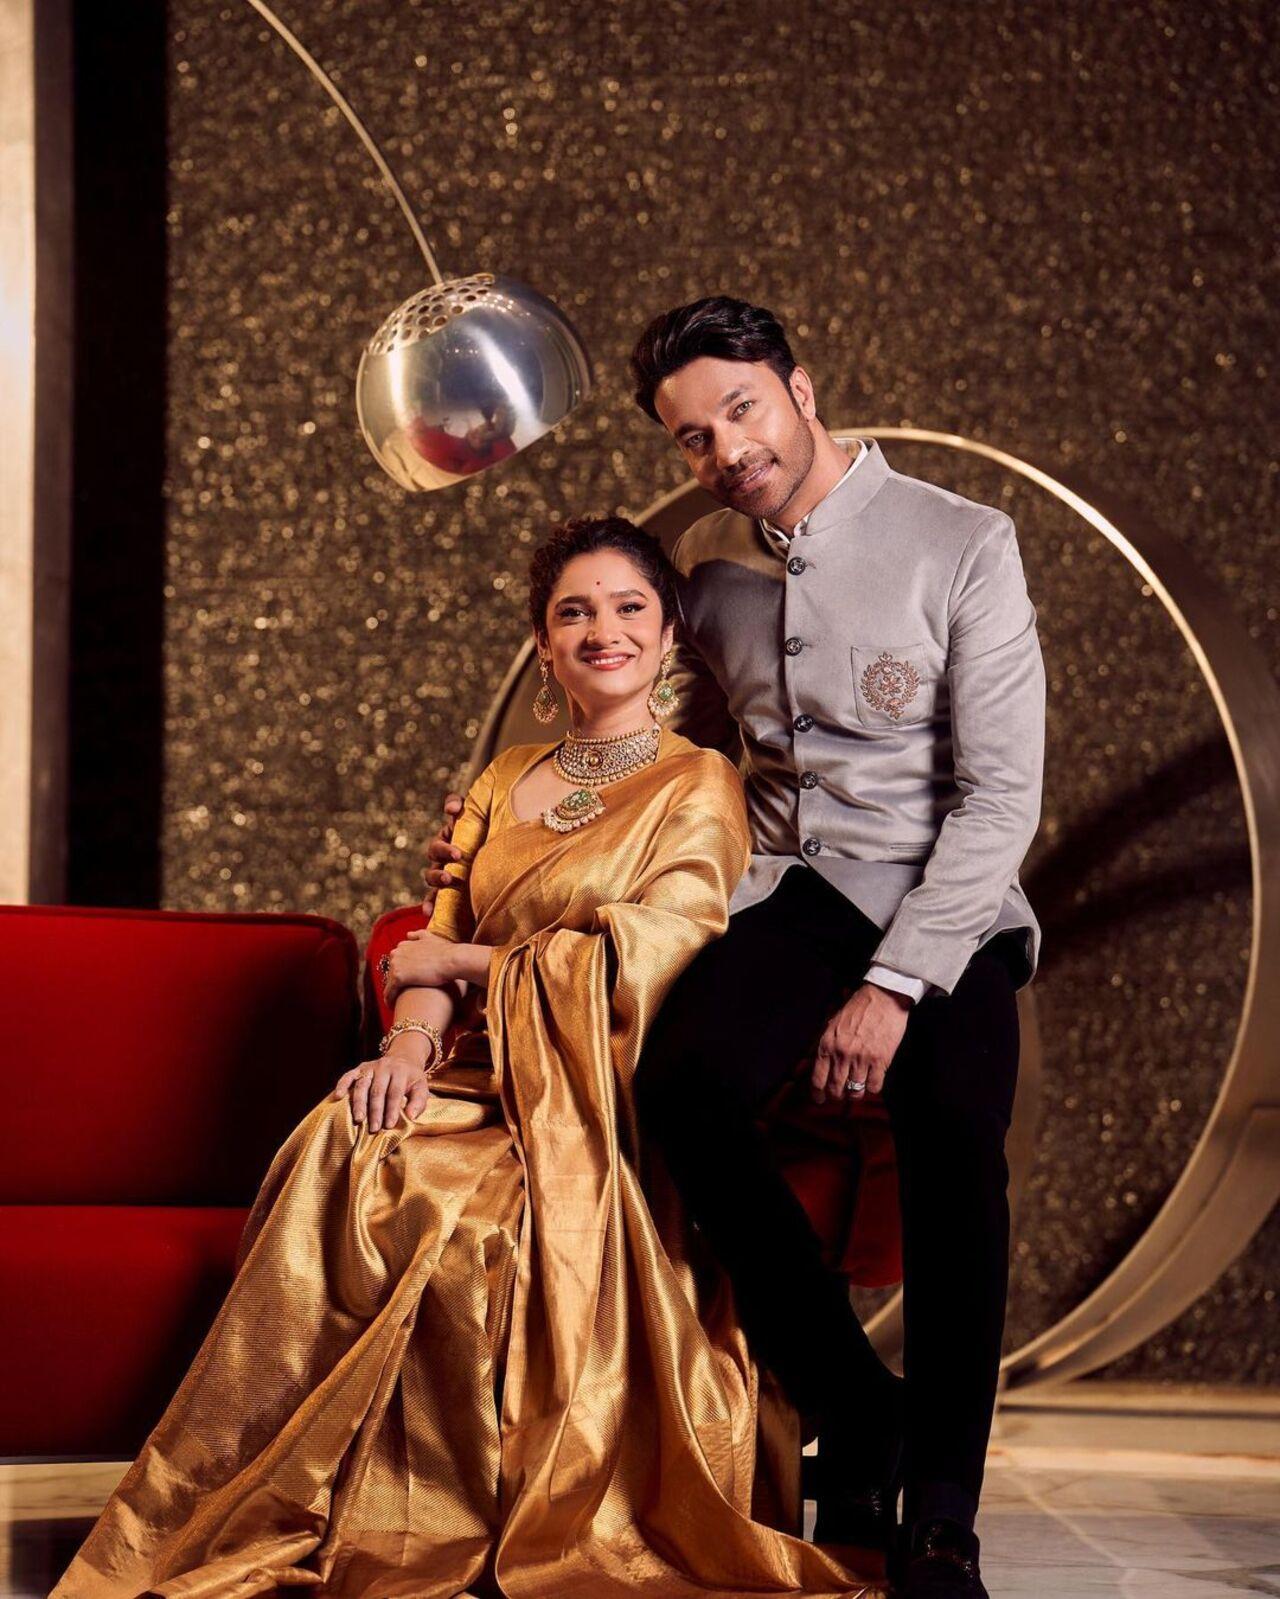 Vicky Jain looked dashing in suit, and wife Ankita complemented him perfectly in a golden saree